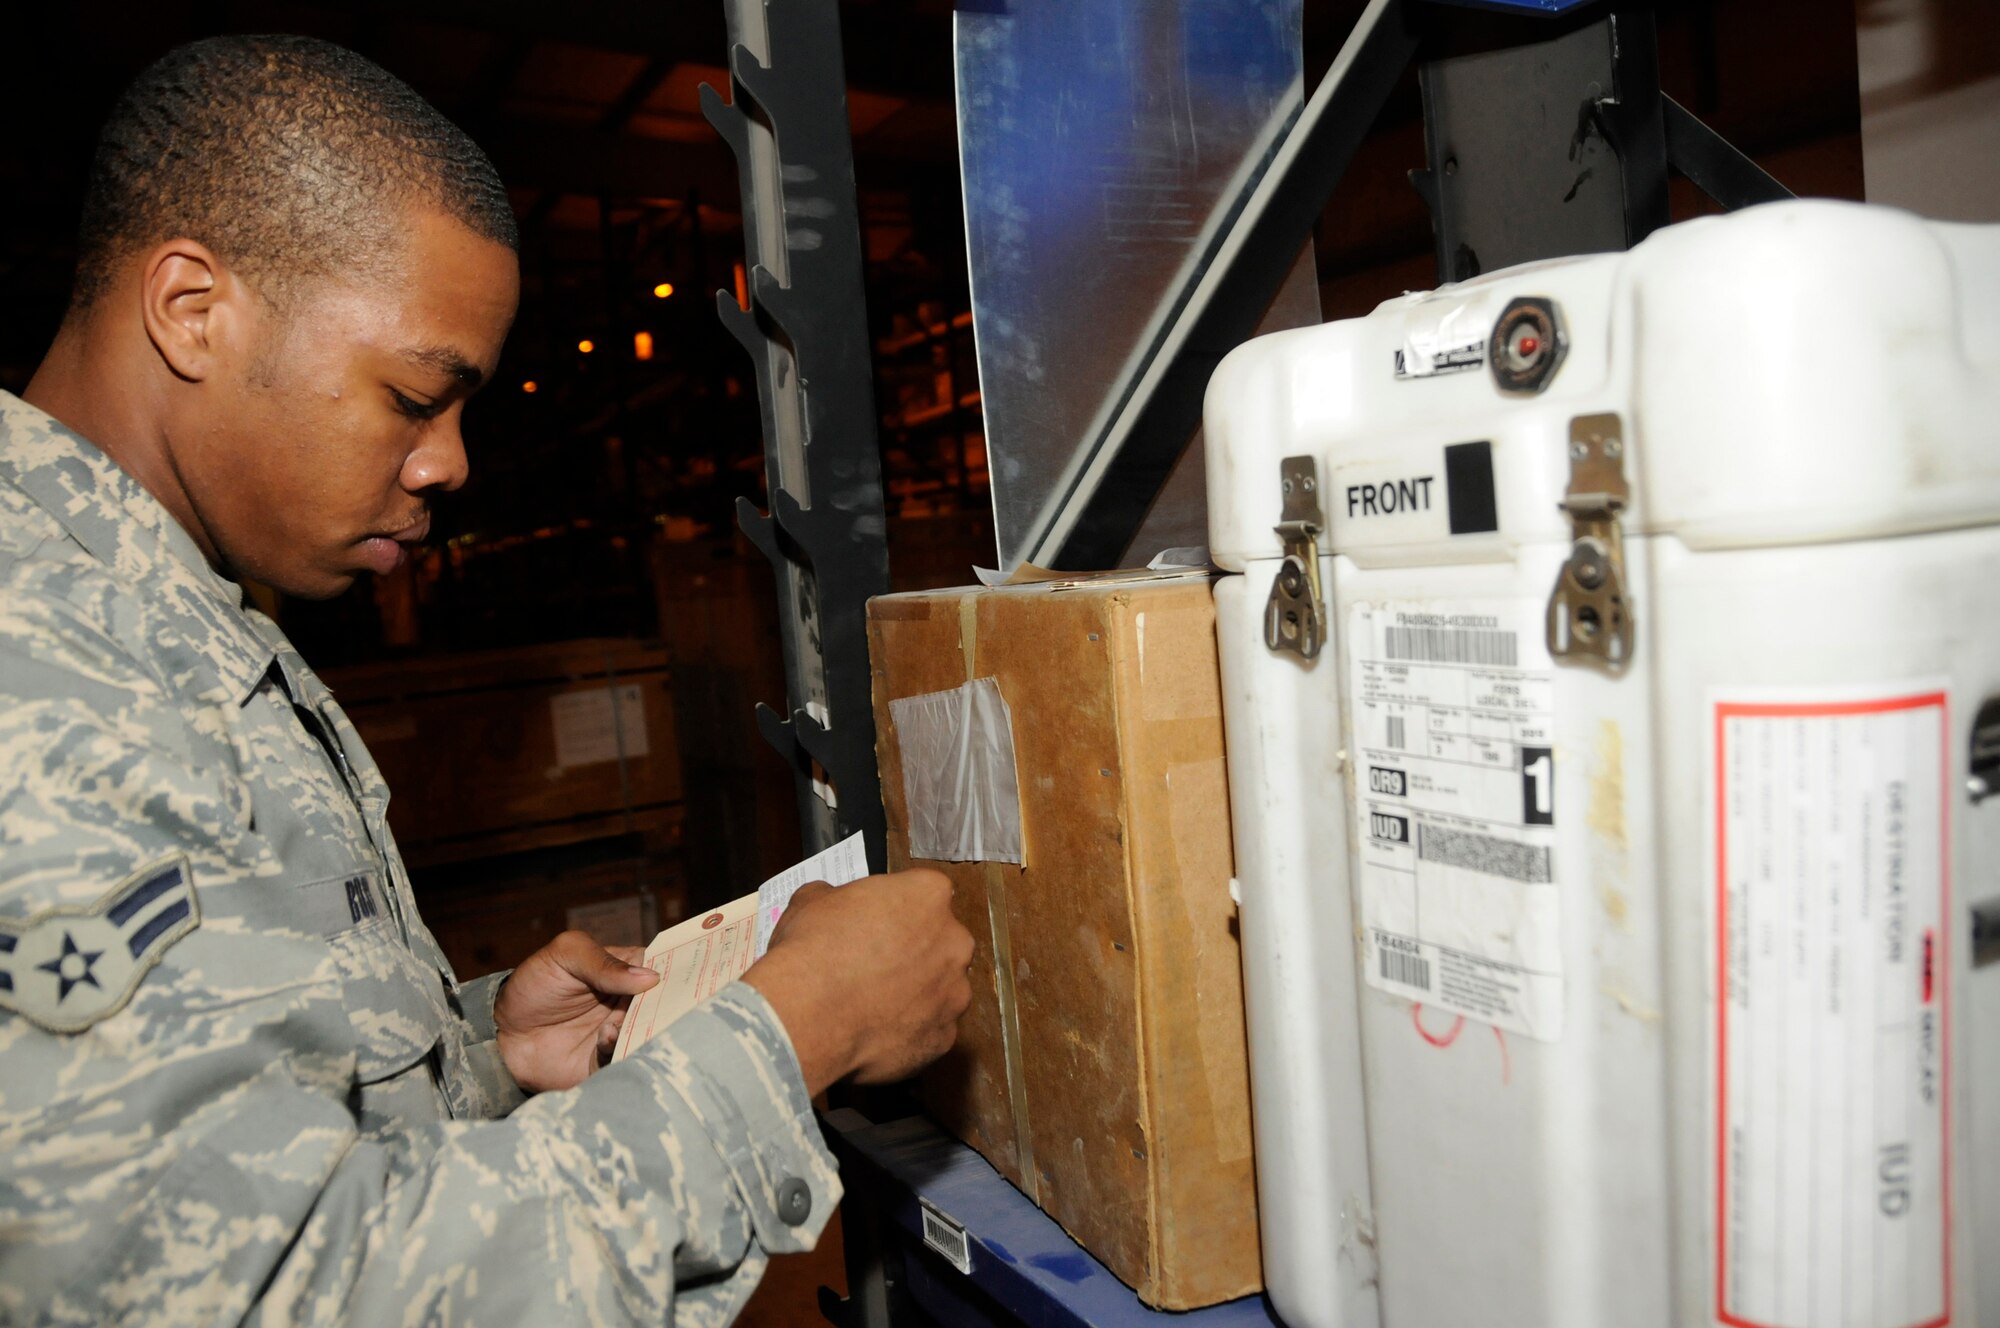 Airman 1st Class Marcus Bostic, flight service center apprentice assigned to the 379th Expeditionary Logistics Readiness Squadron, in checks unserviceable aircraft parts by matching stock numbers and part numbers Nov. 6, at an undisclosed air base in Southwest Asia.  Airman Bostic, a native of Cincinnati, Ohio, is deployed from Moody Air Force Base, Ga., in support of Operations Iraqi and Enduring Freedom and Joint Task Force-Horn of Africa. (U.S. Air Force photo by Staff Sgt. Darnell T. Cannady/Released)